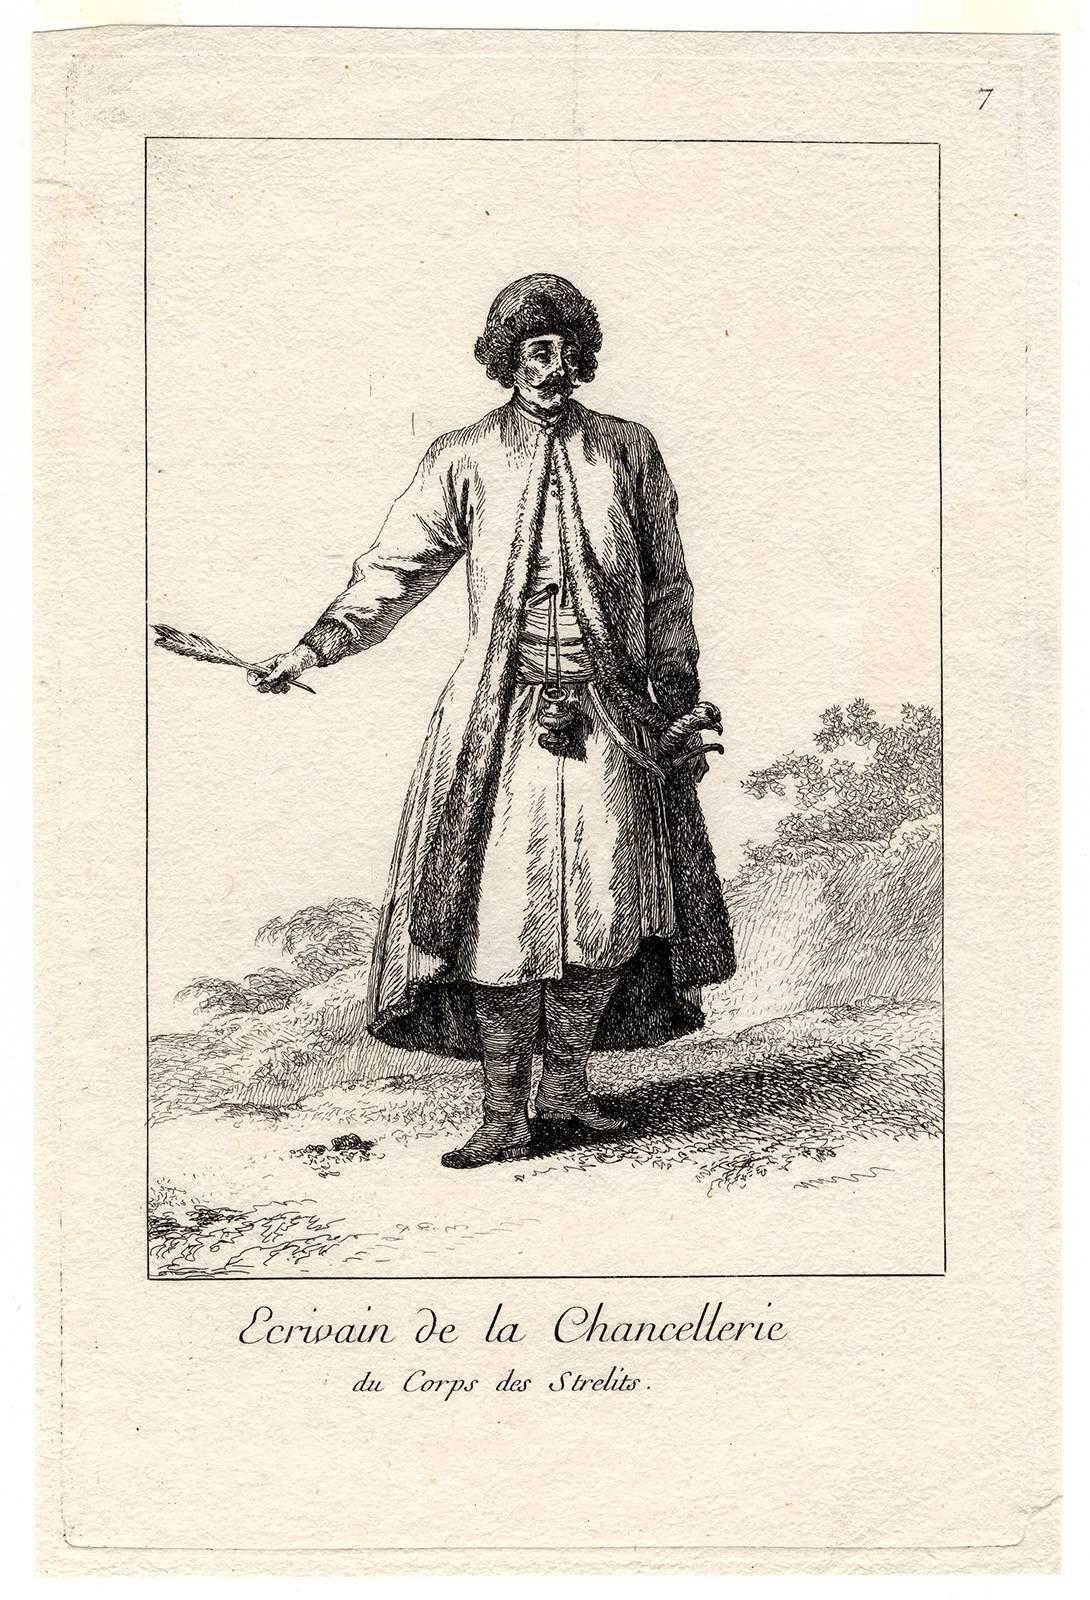 Set of 7 prints from the set of 8 titled 'Les Strelits'. It shows different ranks of soldiers, who were part of the ancient militia of the Strelitz. Le Prince mentions on the title print, that these prints also serve as a depiction of the clothing